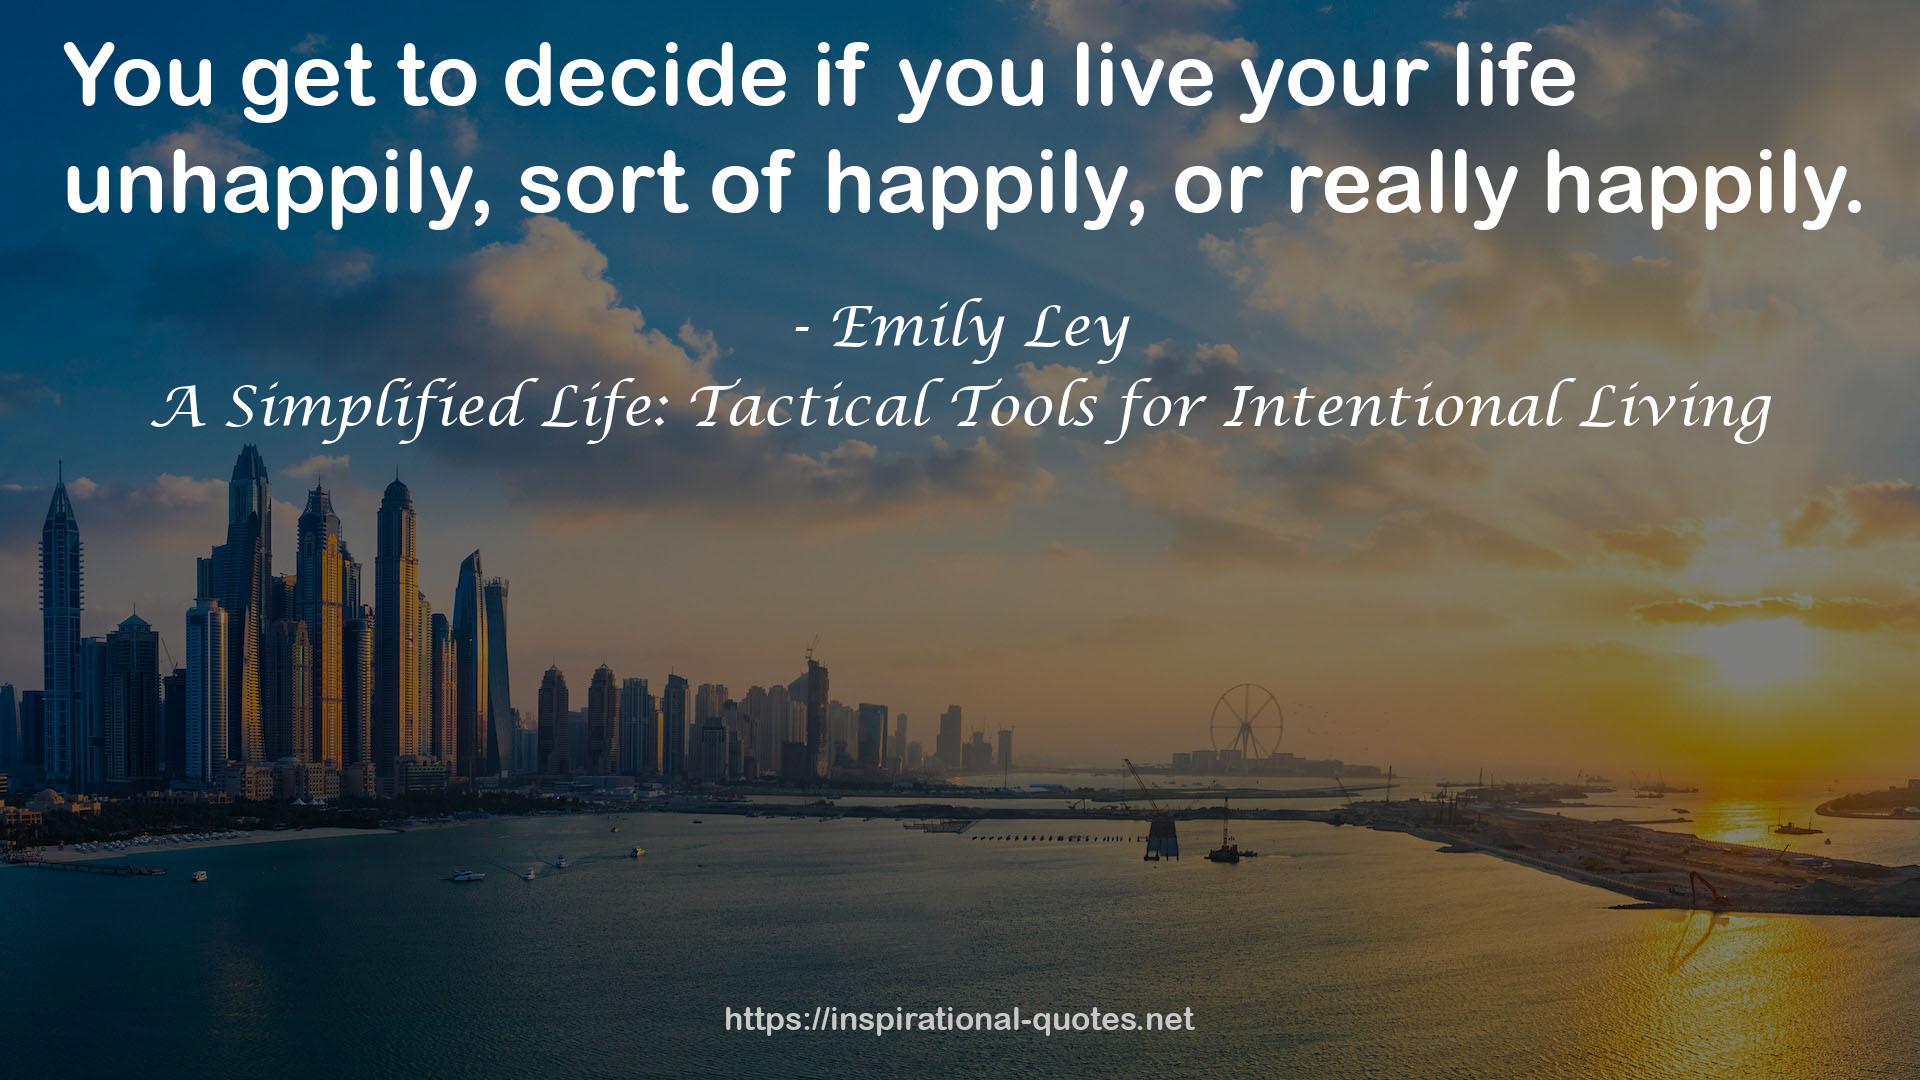 A Simplified Life: Tactical Tools for Intentional Living QUOTES